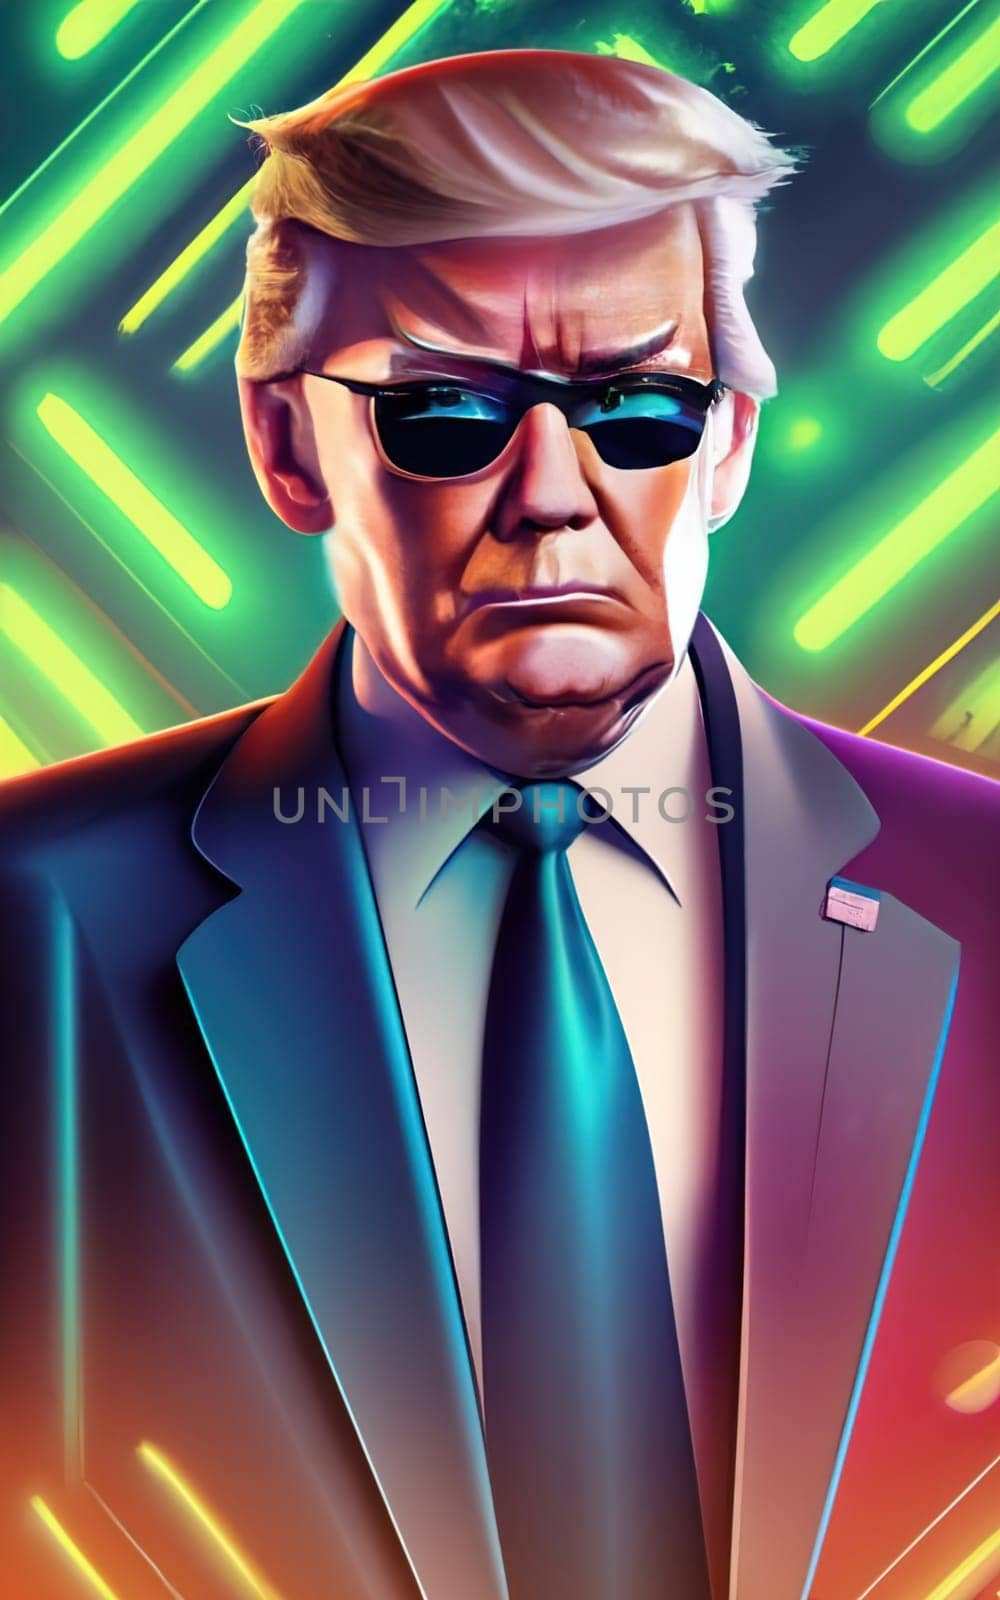 Donald Trump, full body, with a jacket, tie and black glasses, in the background there are green bars or codes like in the movie The Matrix by igor010